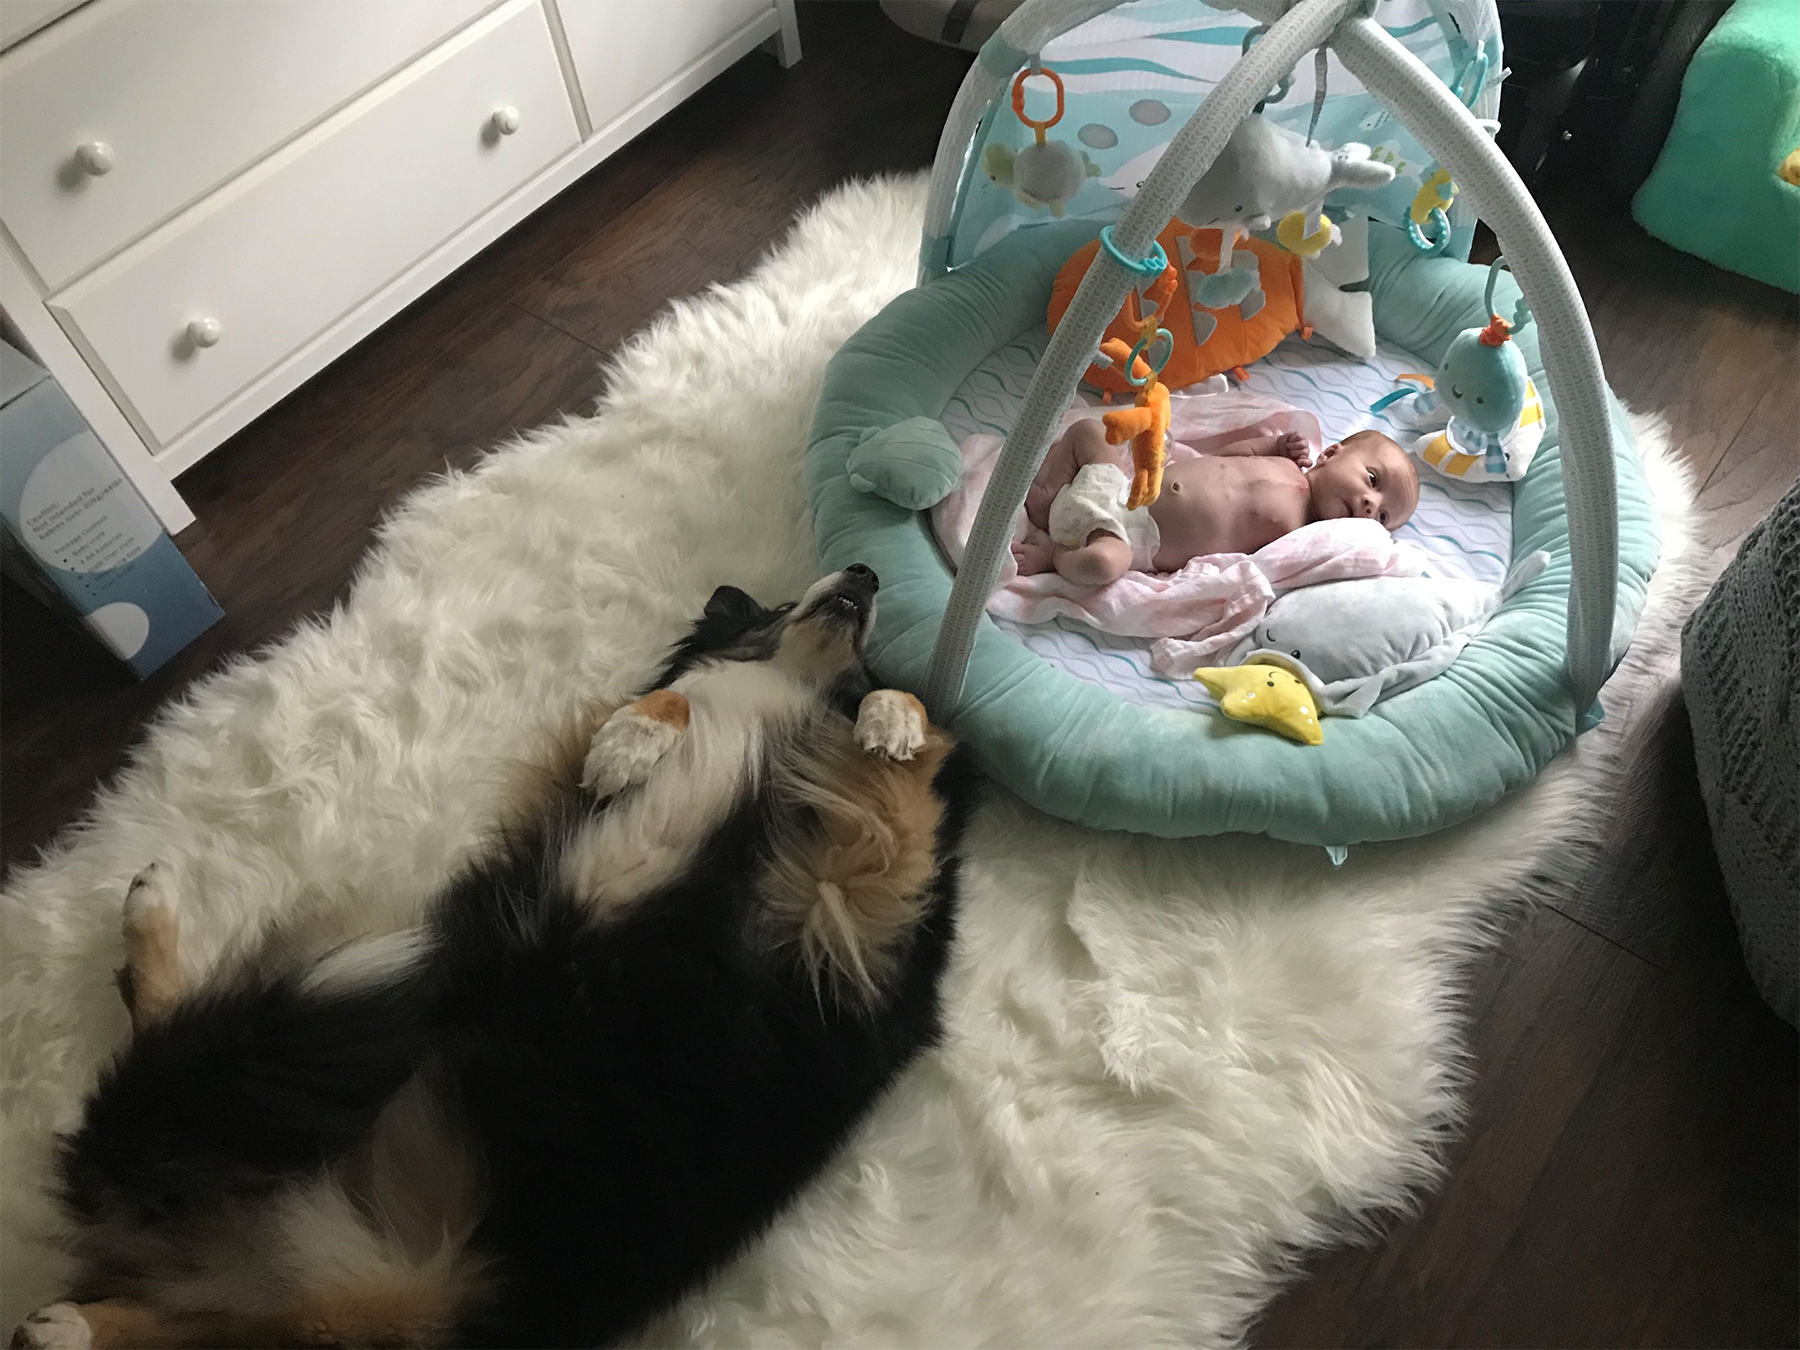 Riley is at home with her furry brother and sister, Brody and Stella. The Australian shepherds stay by her side as she grows stronger each day.